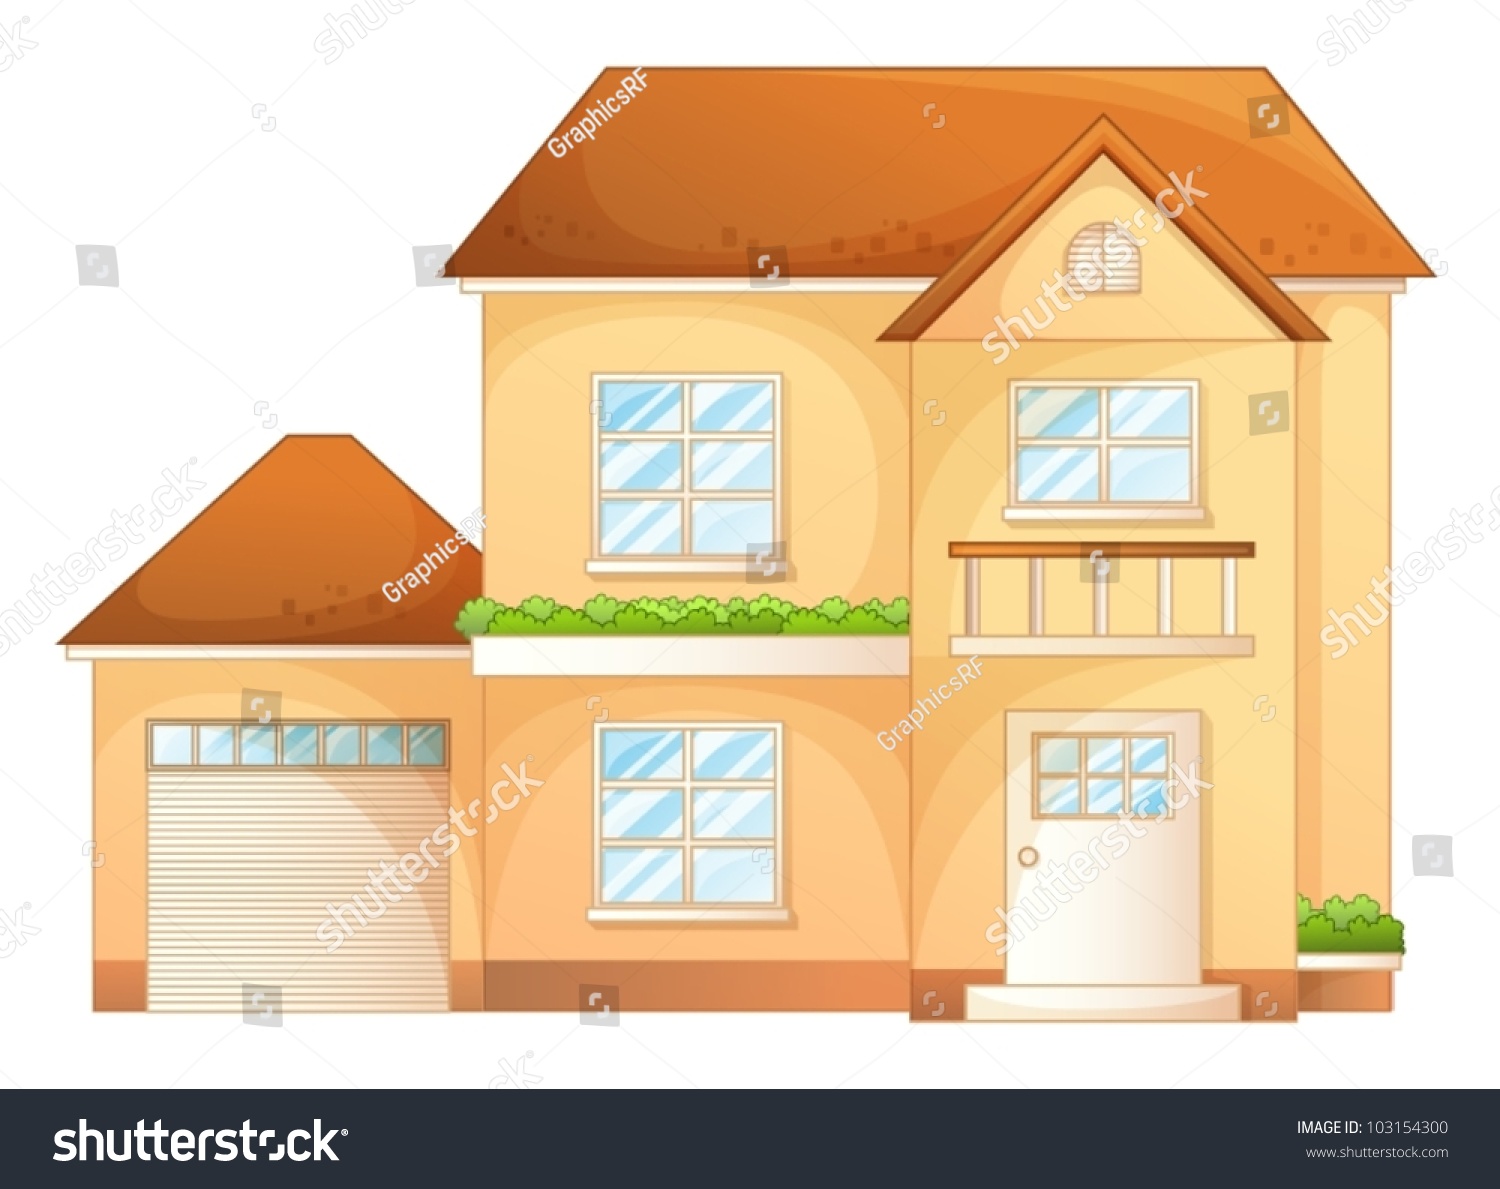 house side view clipart - photo #22